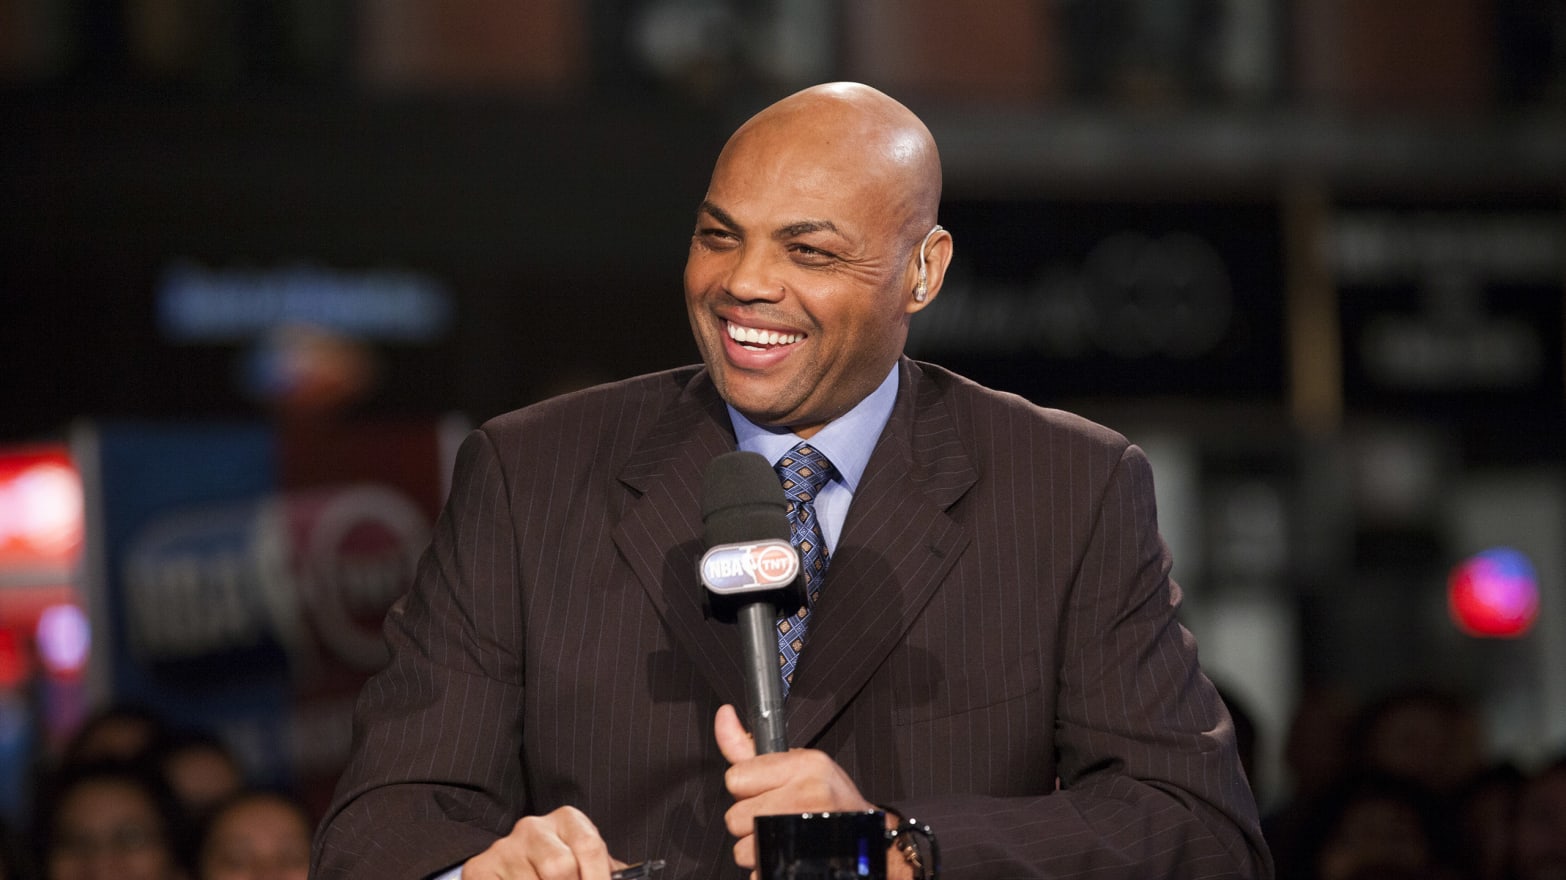 Charles Barkley during a broadcast